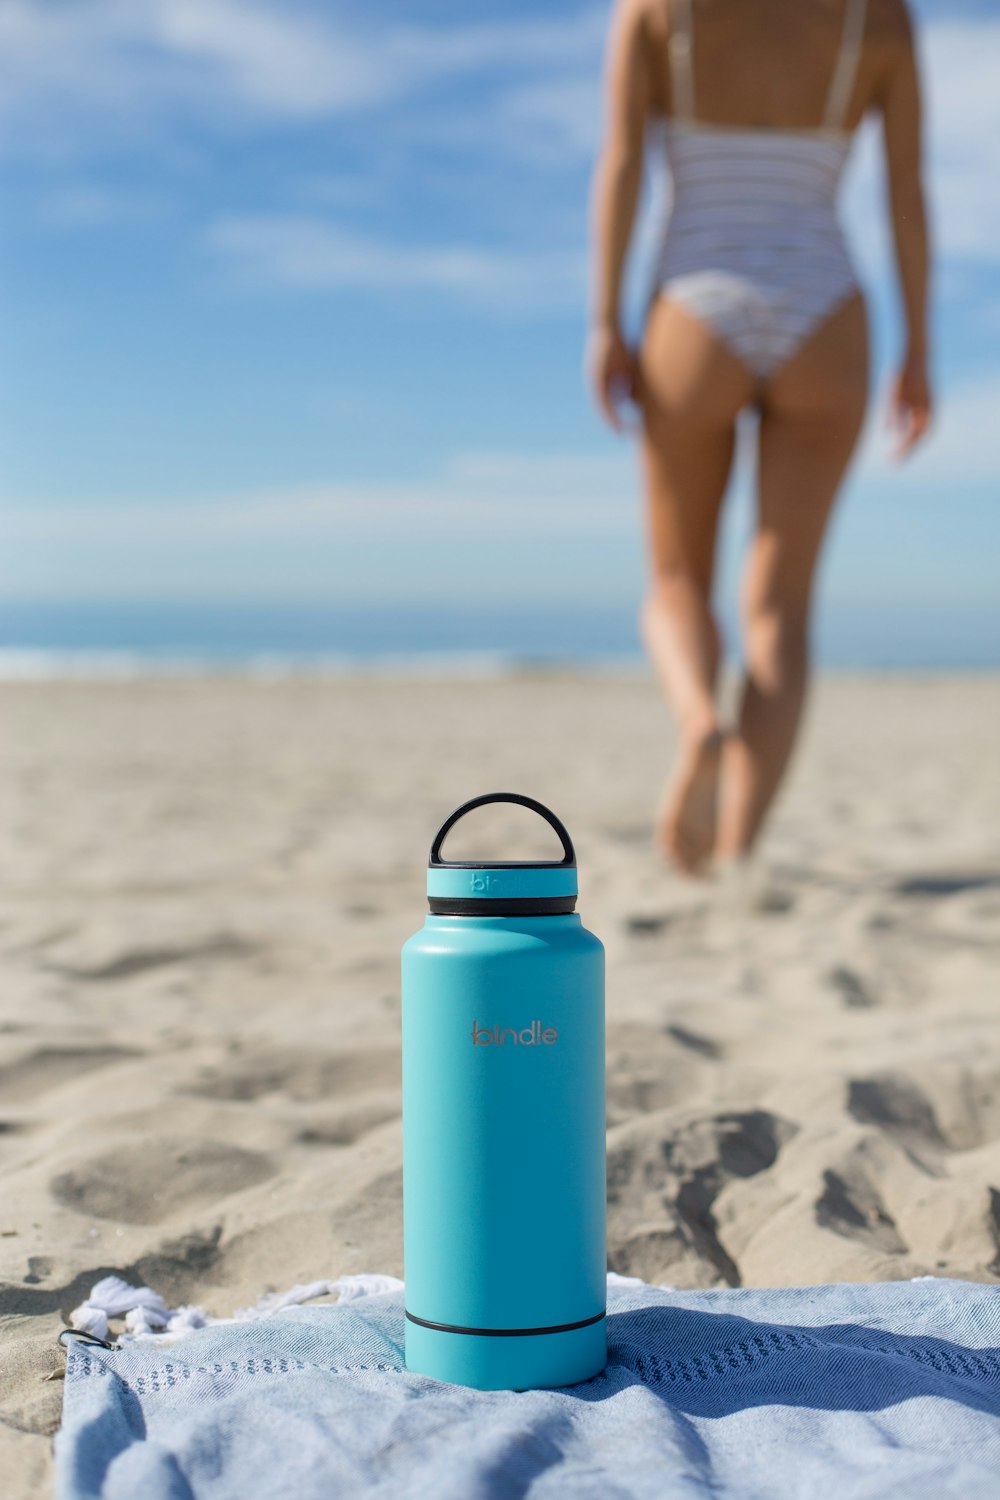 woman in white bikini bottom holding blue and black thermal carafe on beach during daytime